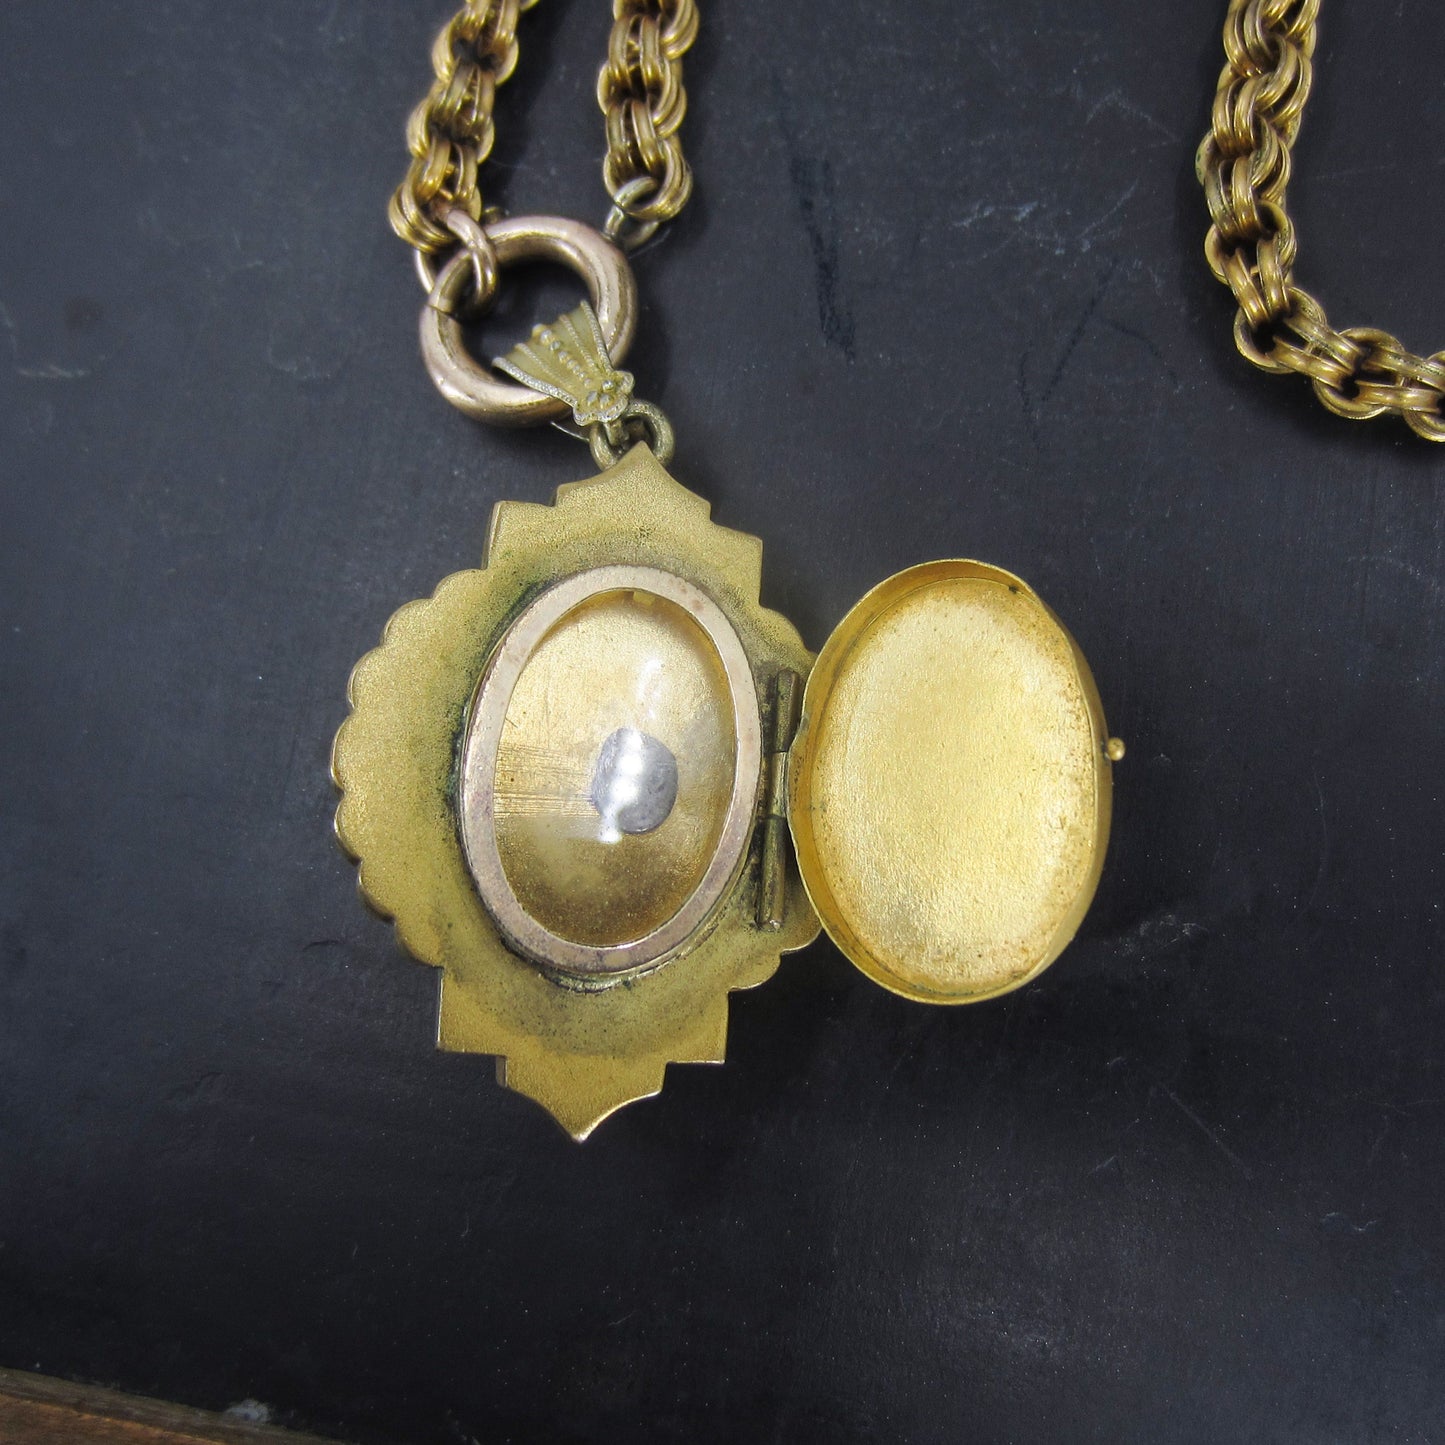 SOLD-Victorian Etruscan Revival Locket and Chain Gold-Filled c. 1880